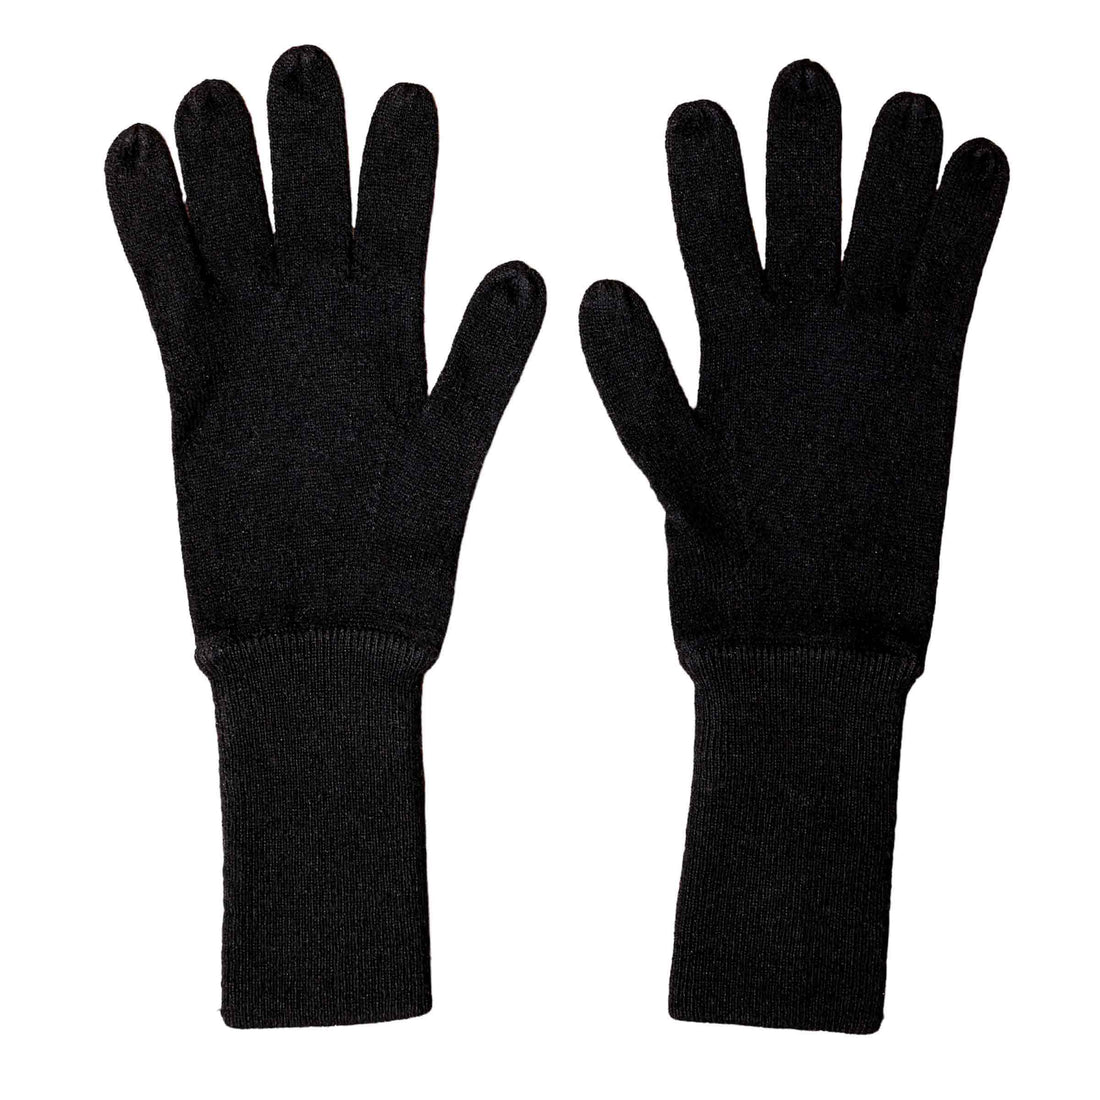 Allude wool gloves